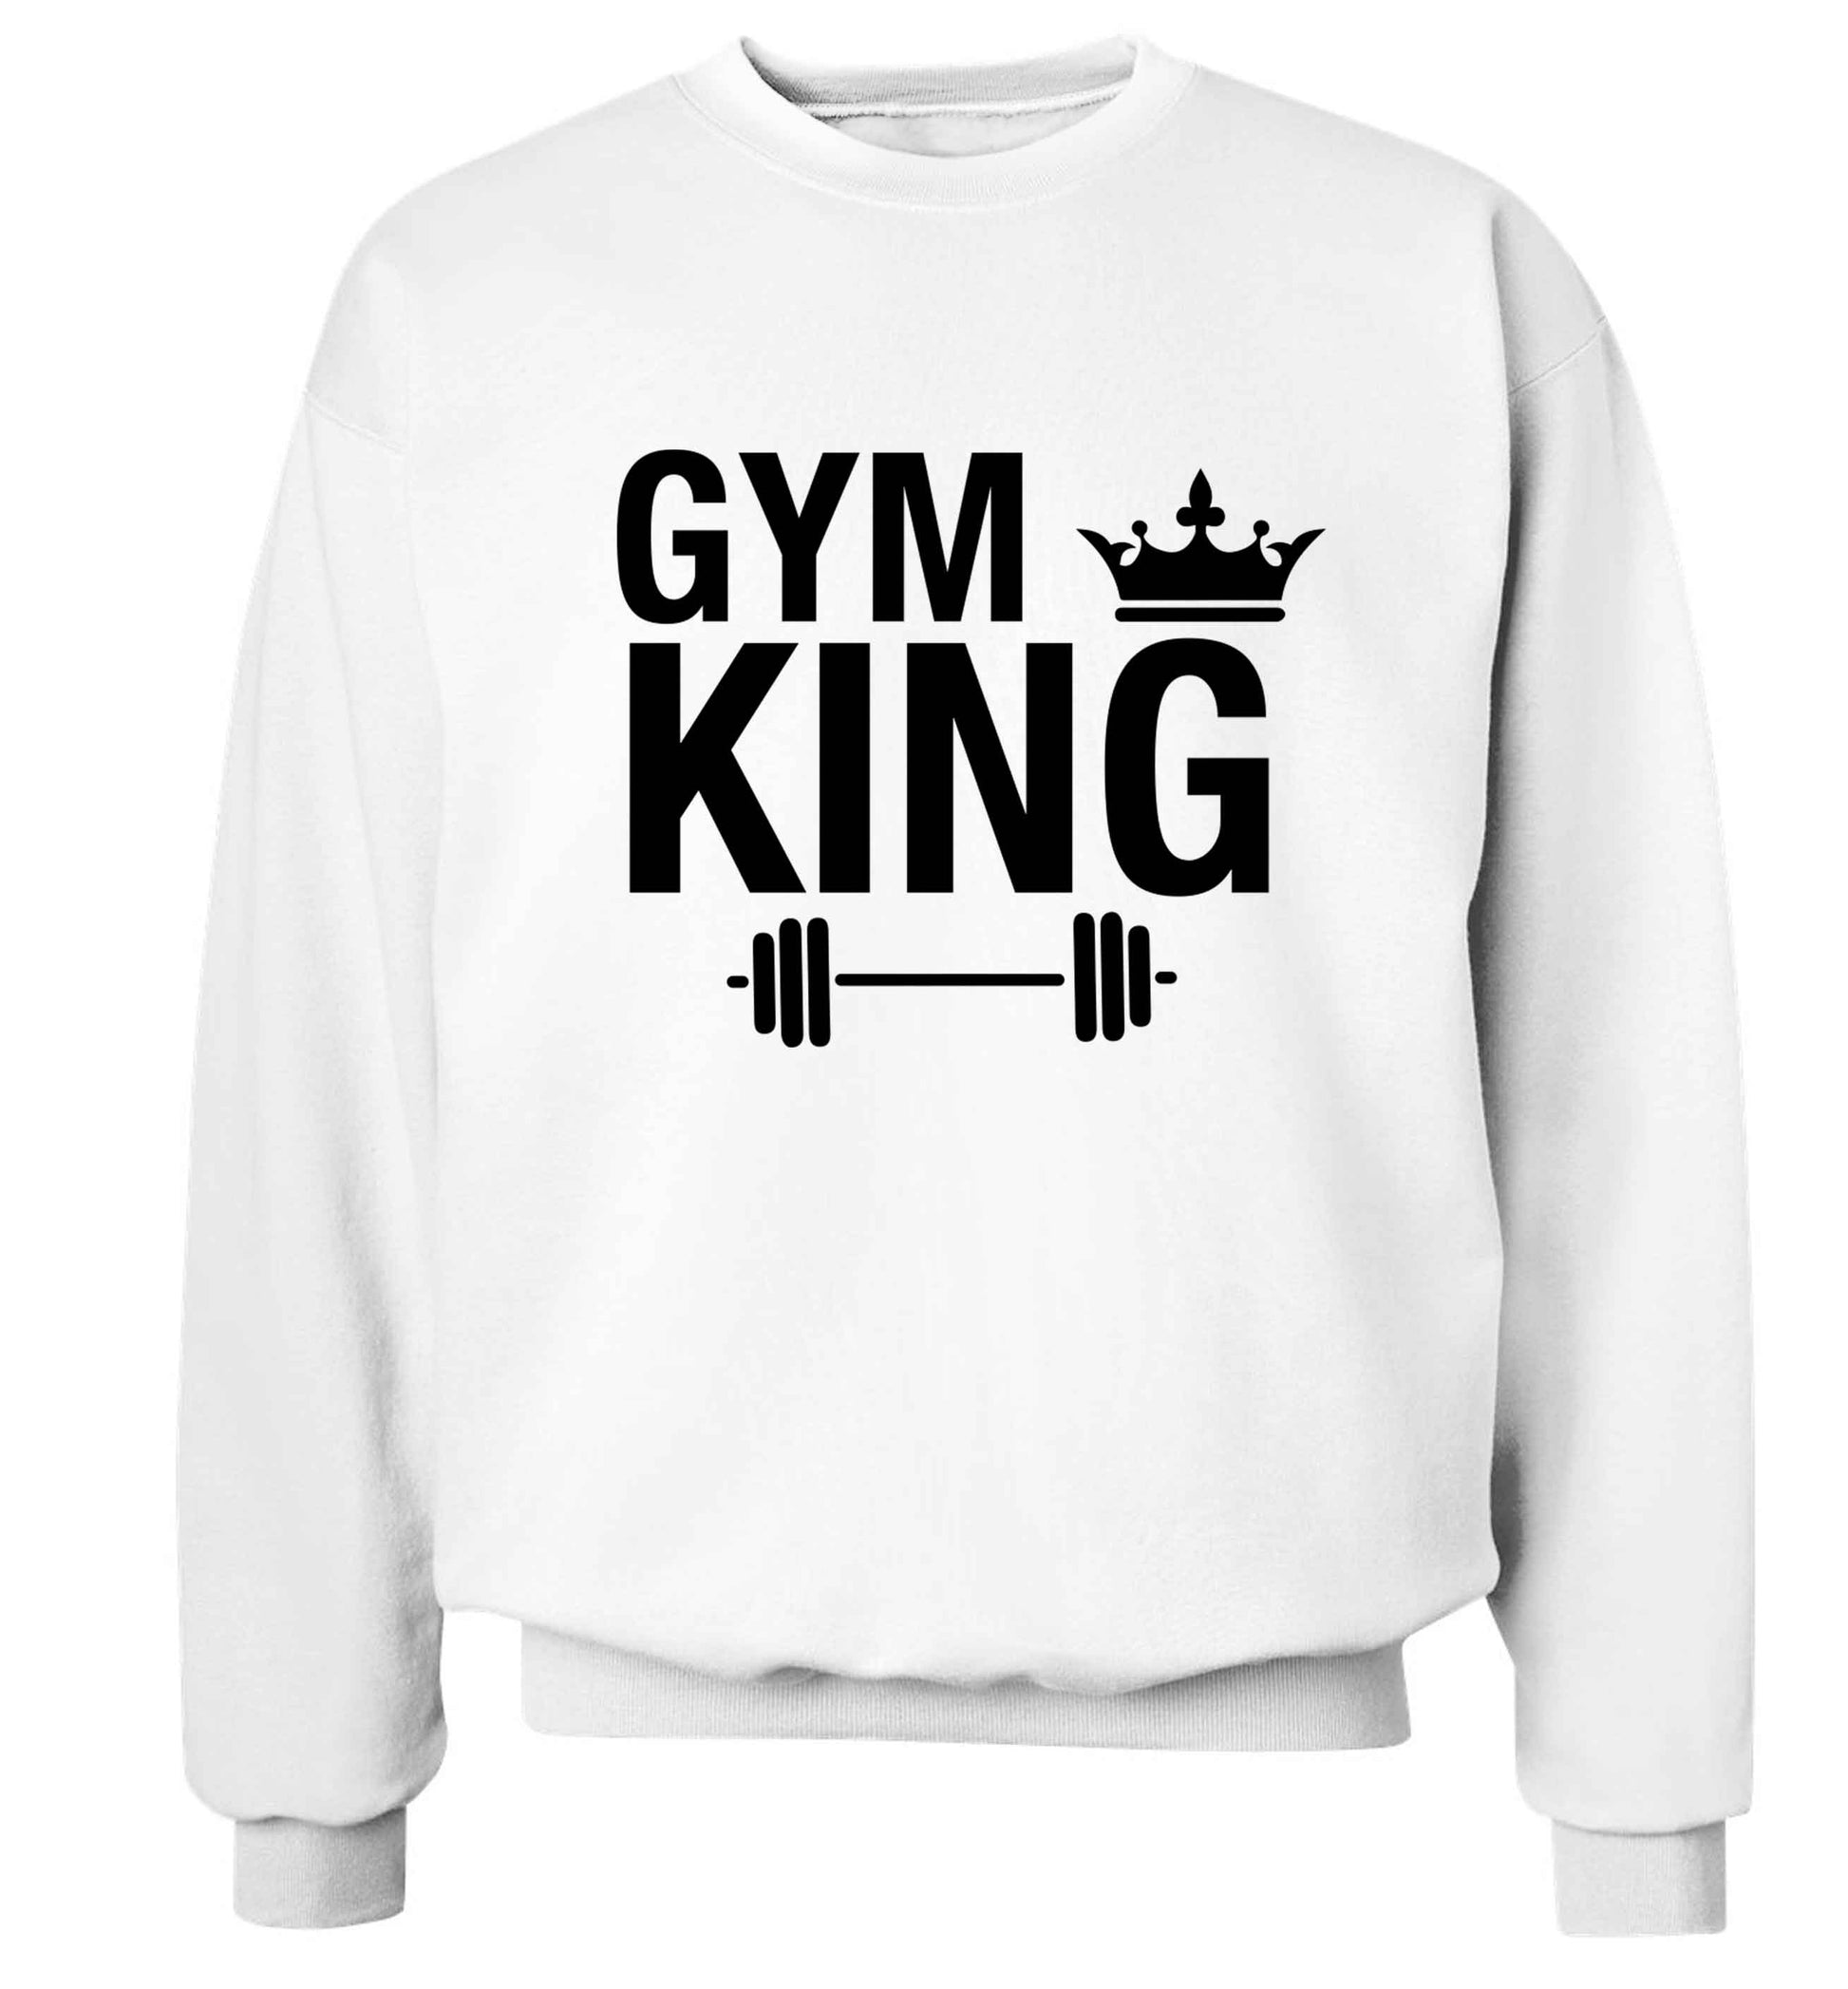 Gym king Adult's unisex white Sweater 2XL